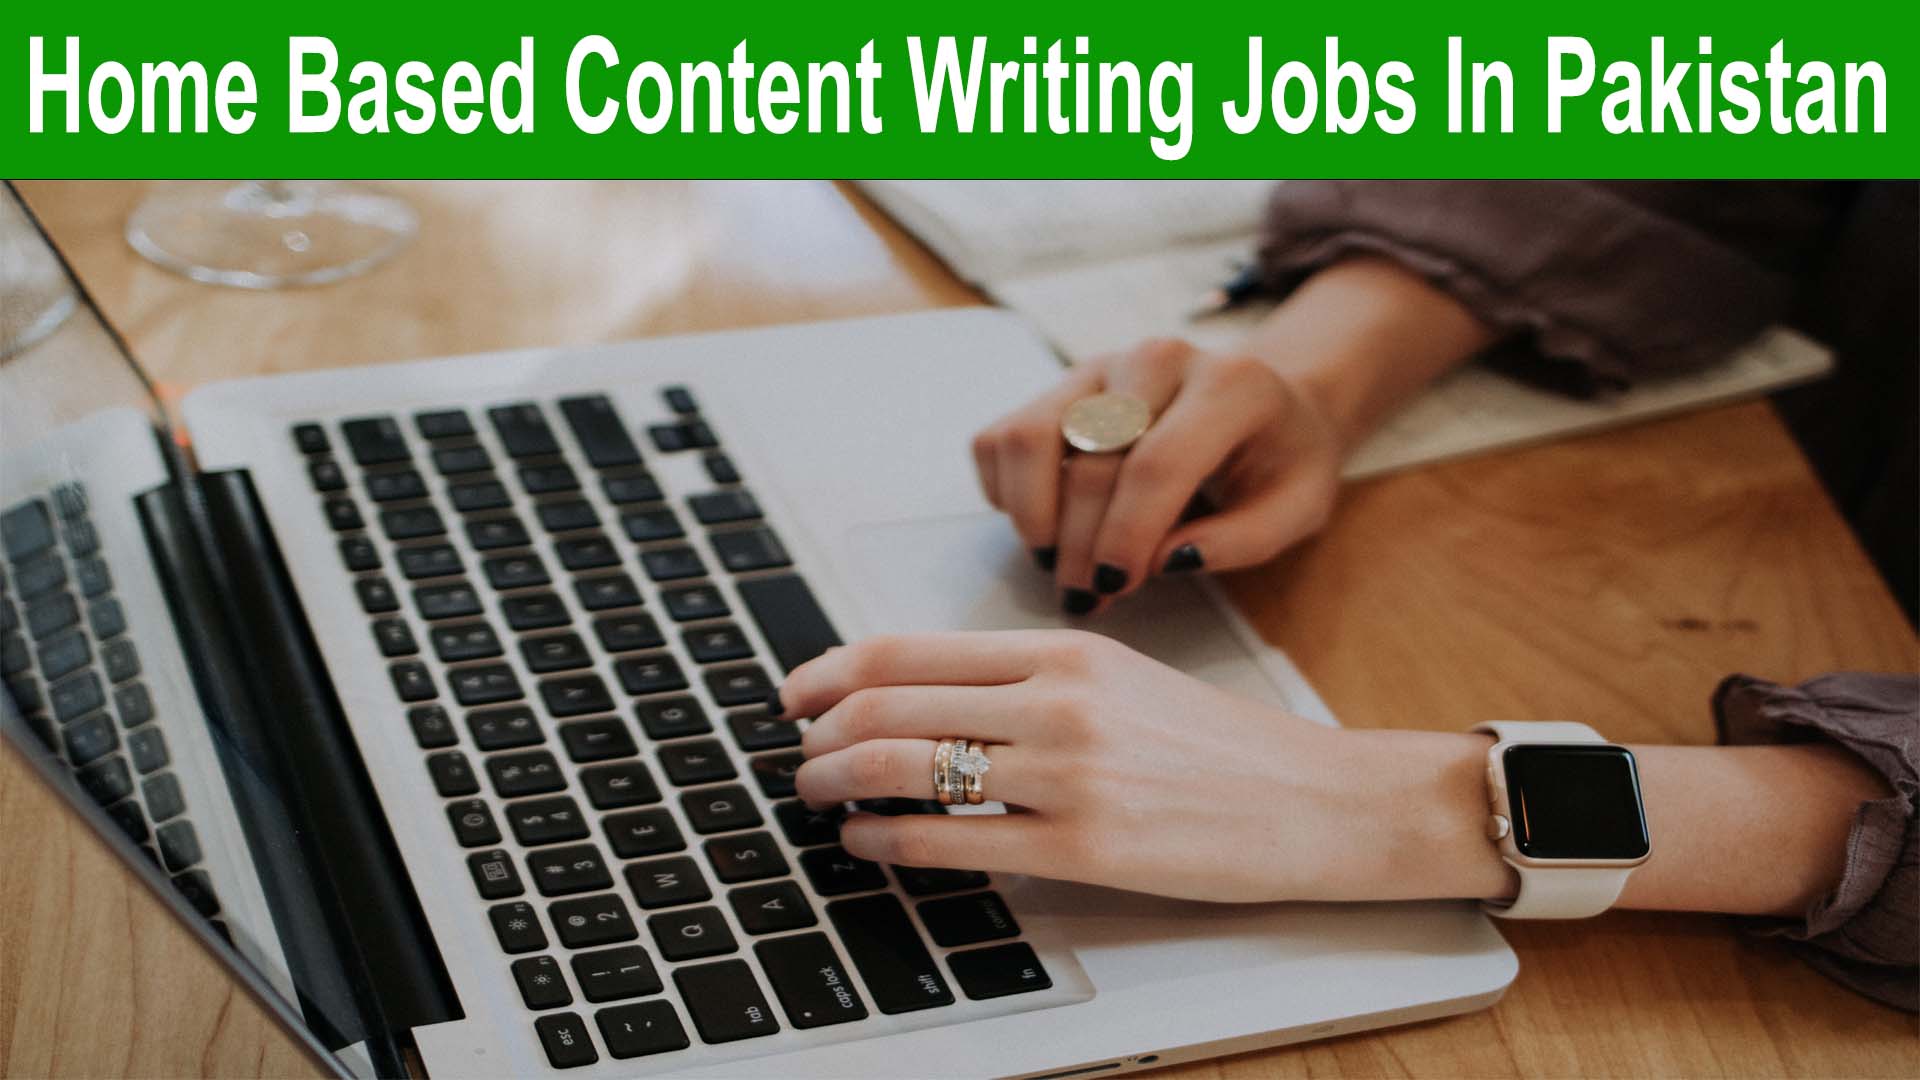 Home Based Content Writing Jobs In Pakistan